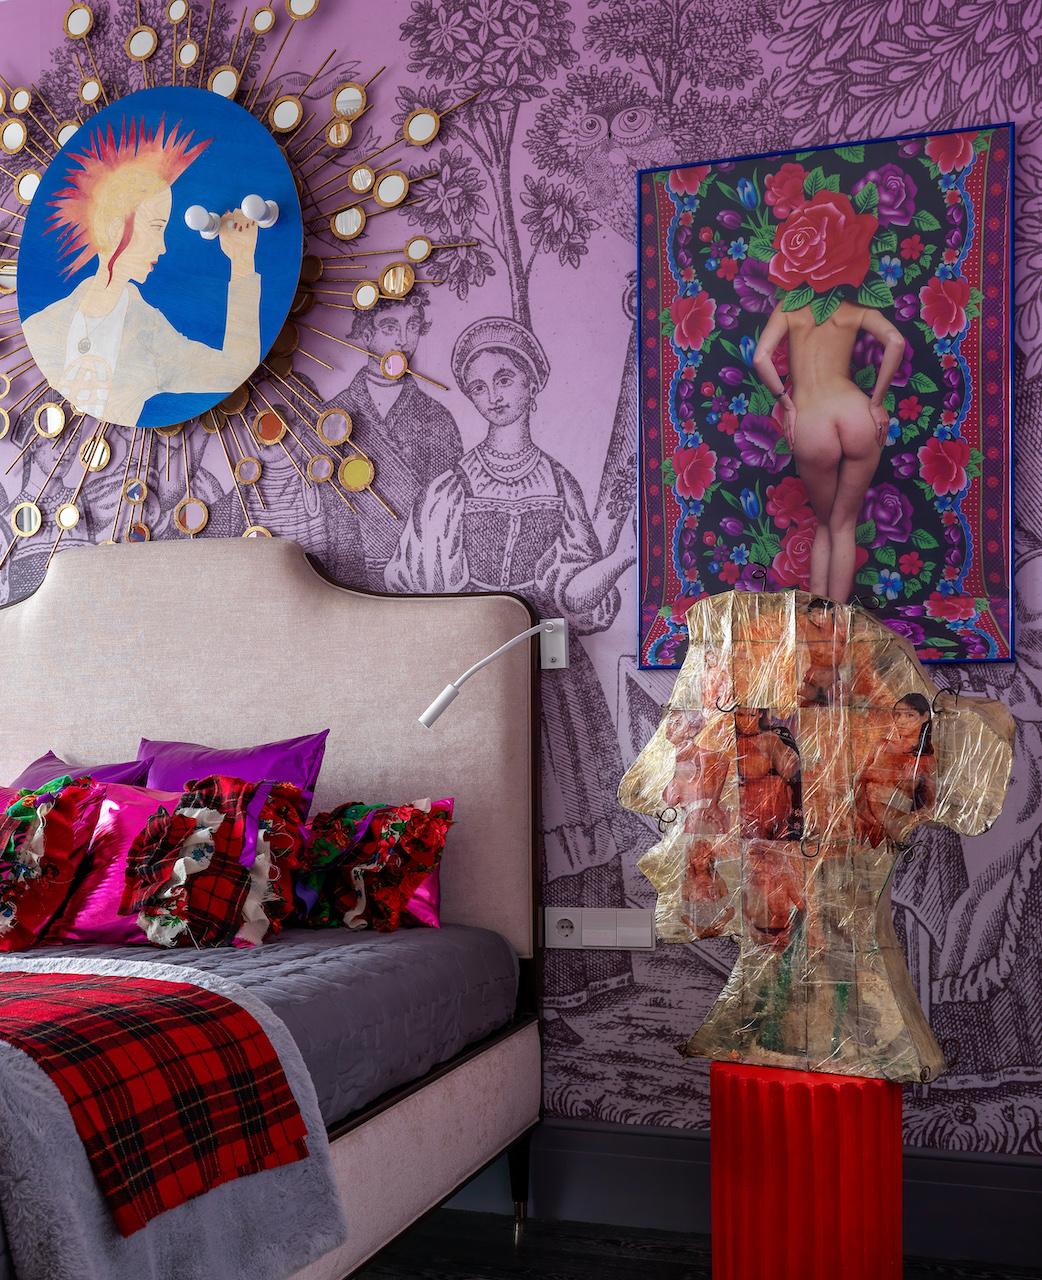 A Russia House Overflowing with Whimsical Decorations